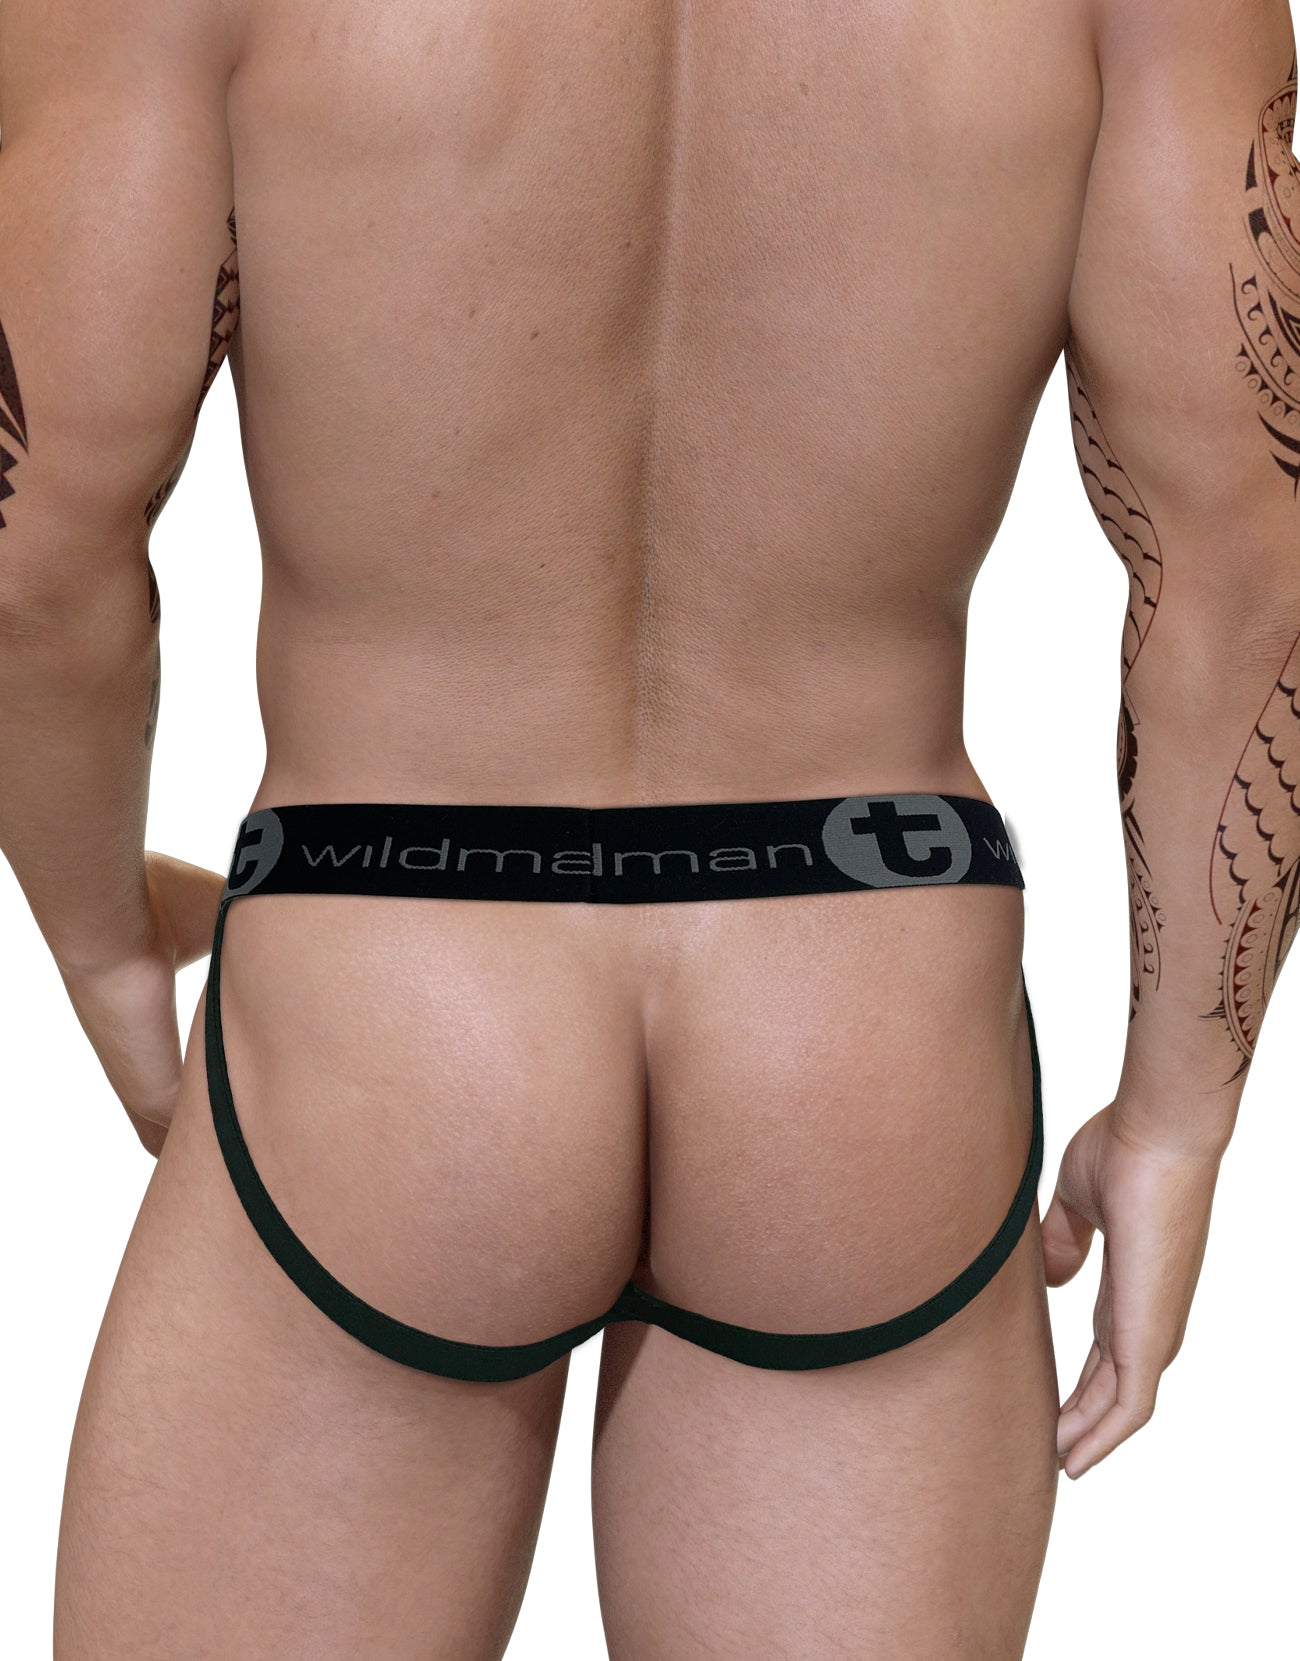 Wildmant Mesh Monster Cock Strapless Pouch Black (Small) at